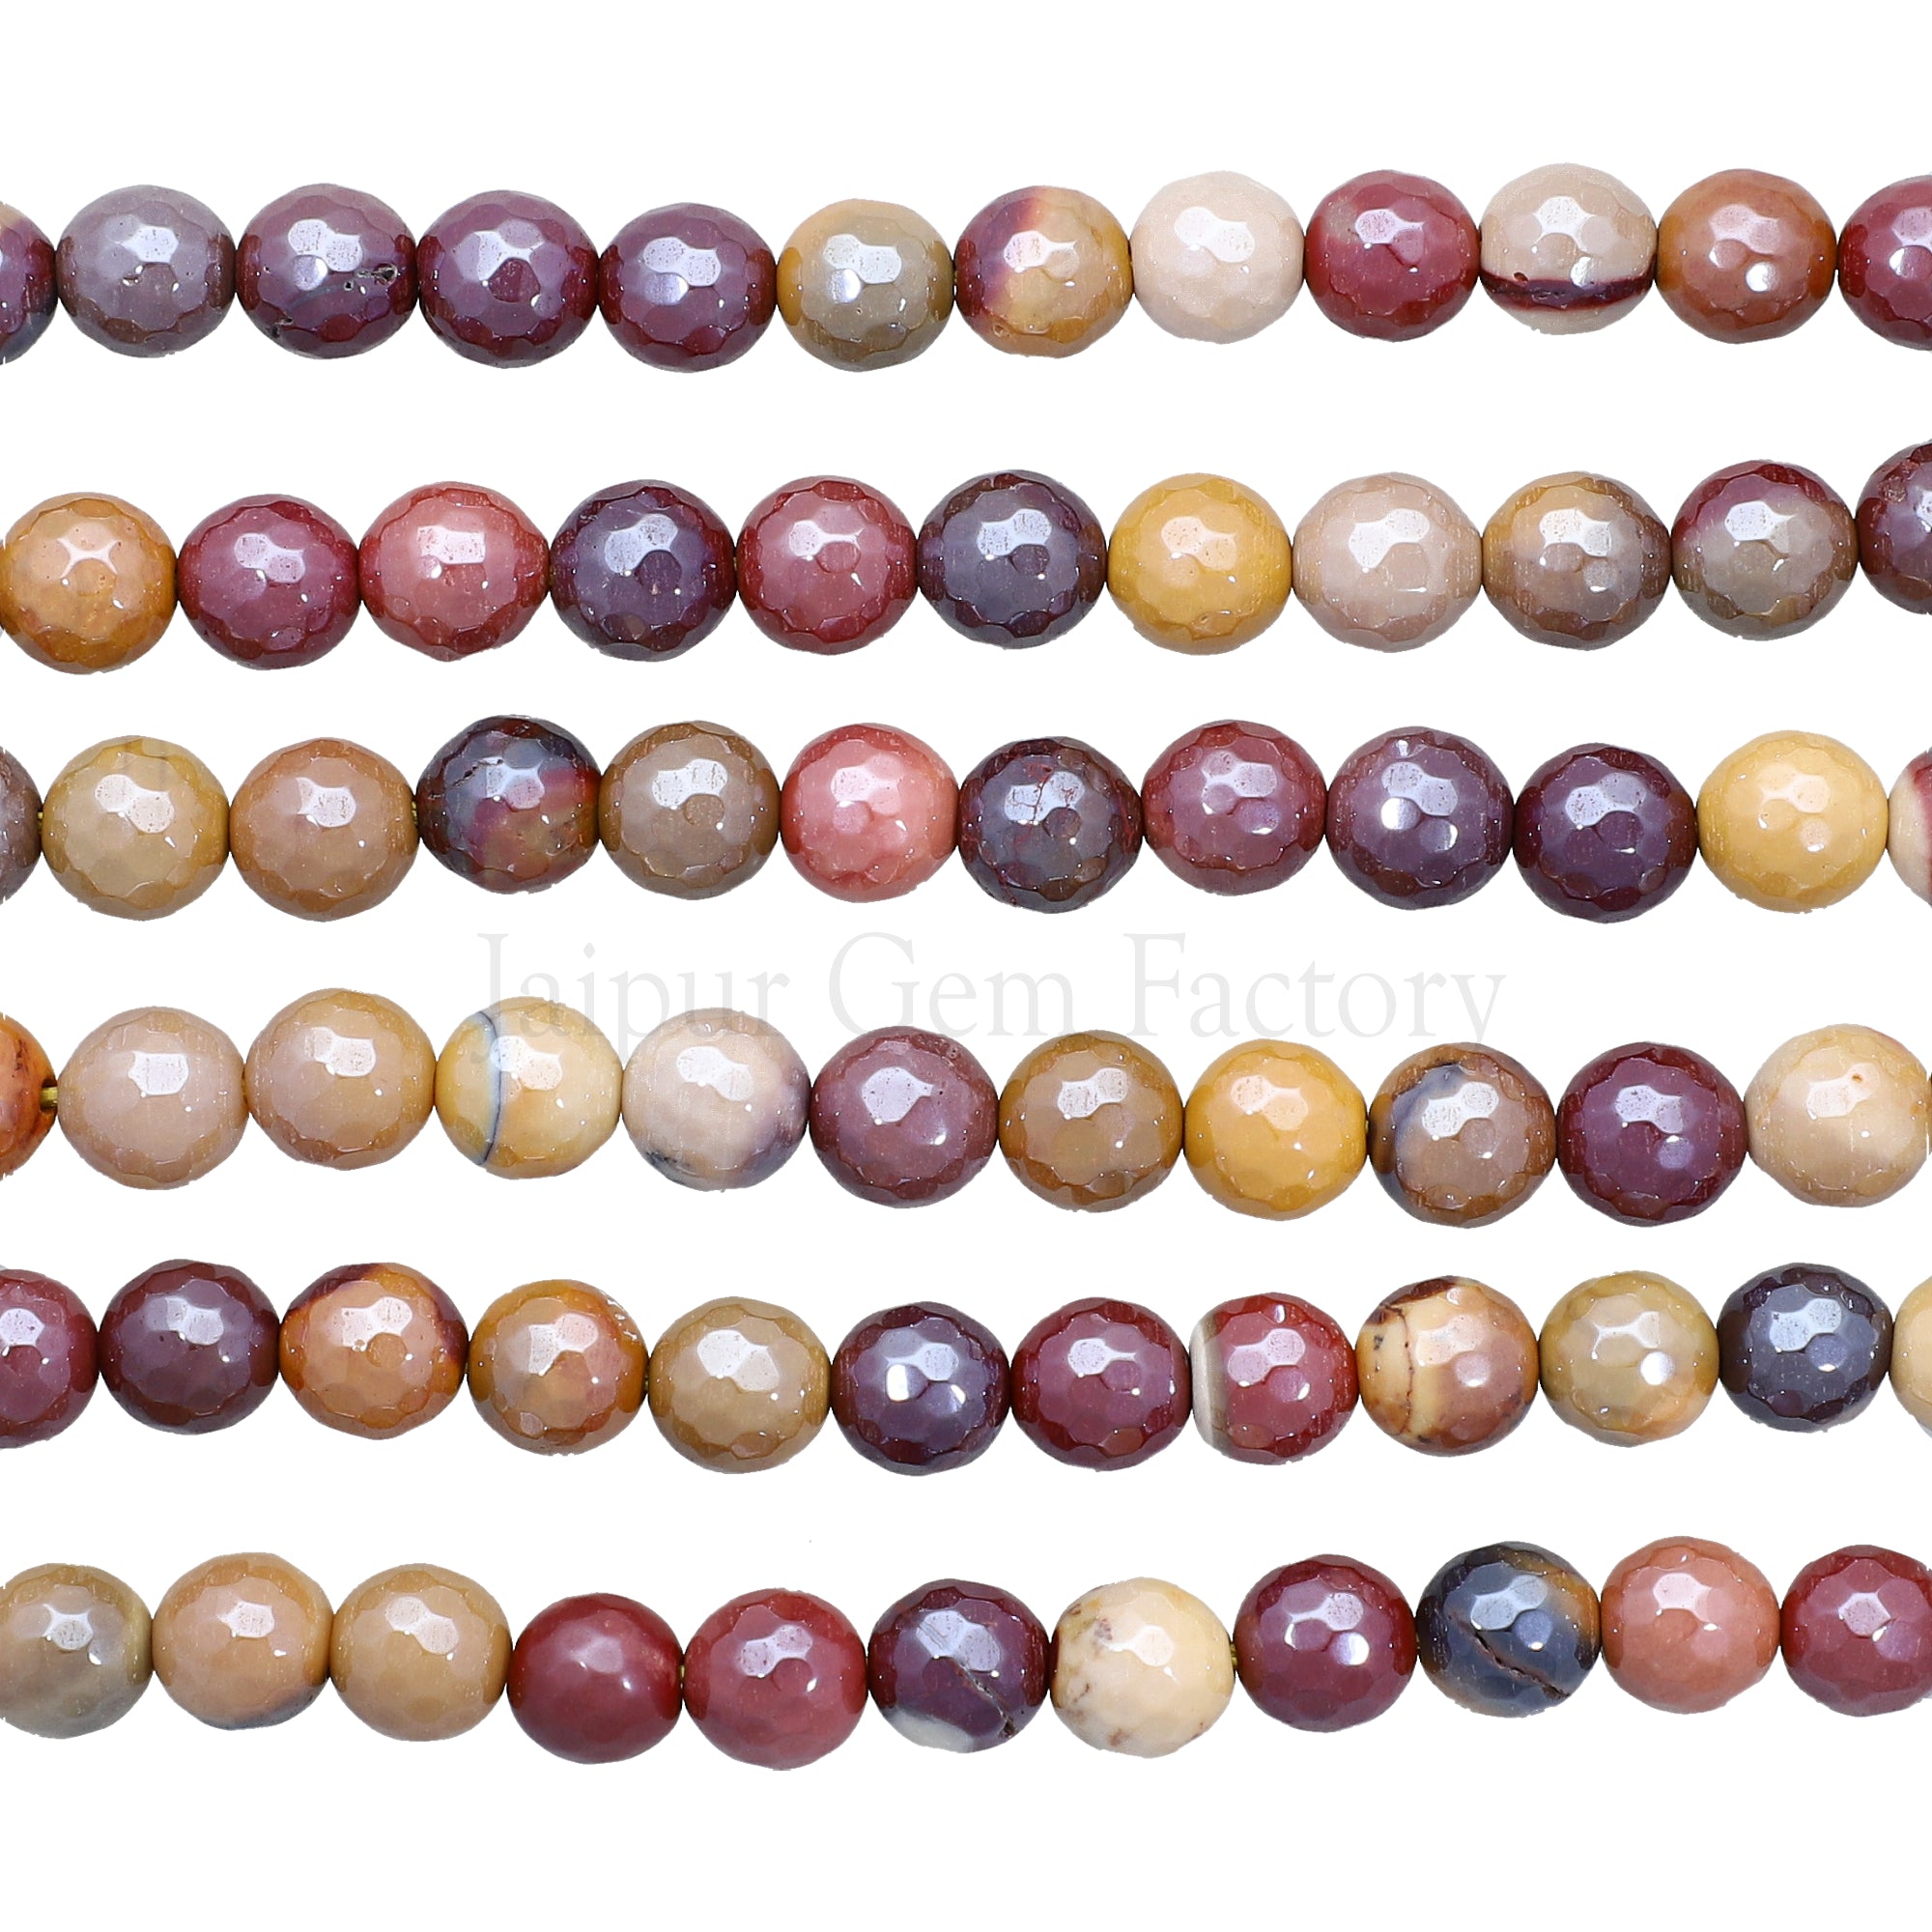 8 MM Mystic Coated Mookaite Faceted Round Beads 15 Inches Strand